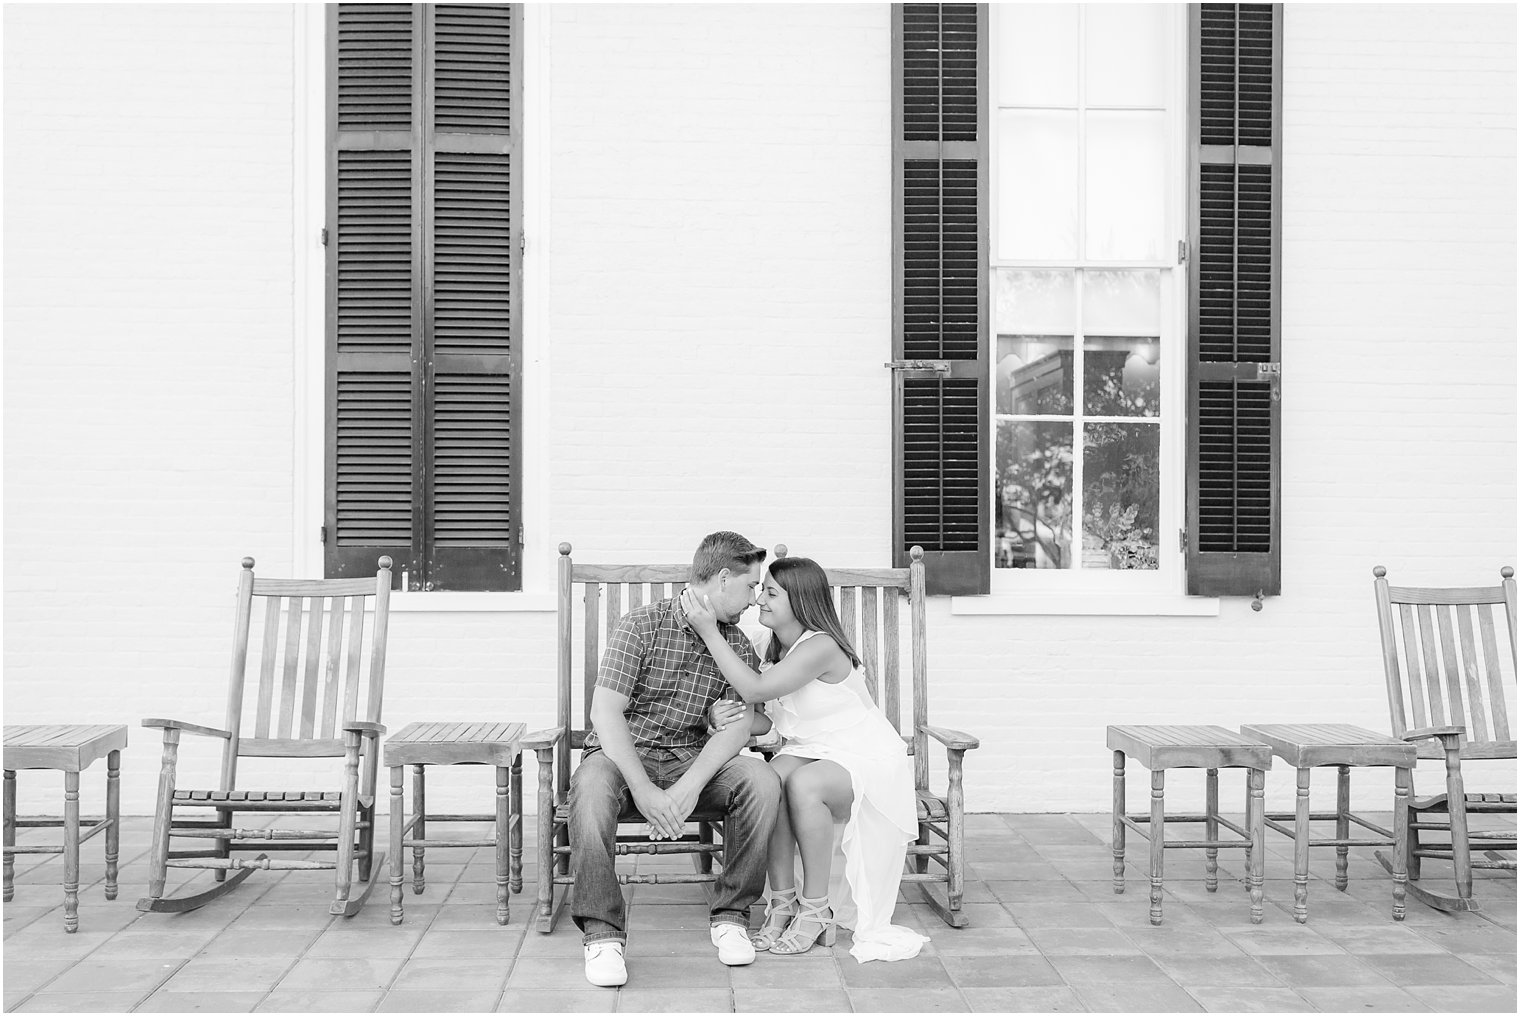 Sweet engagement photo in Congress Hall, Cape May NJ